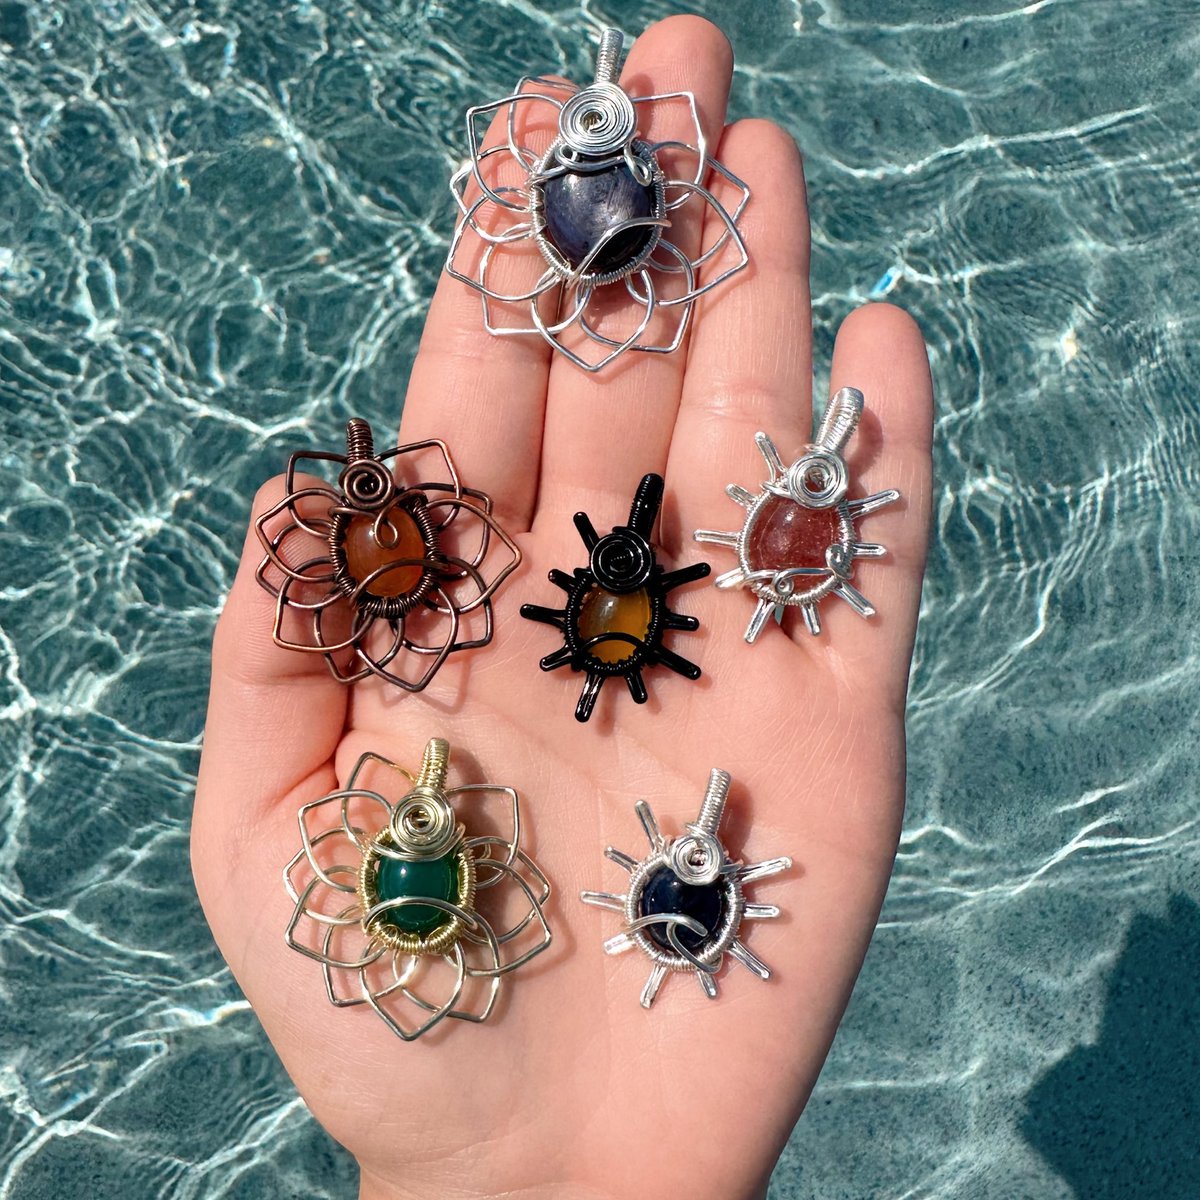 handfuls of baby sun & flower pendants🌈

available June 9th (tomorrow) 8pm est